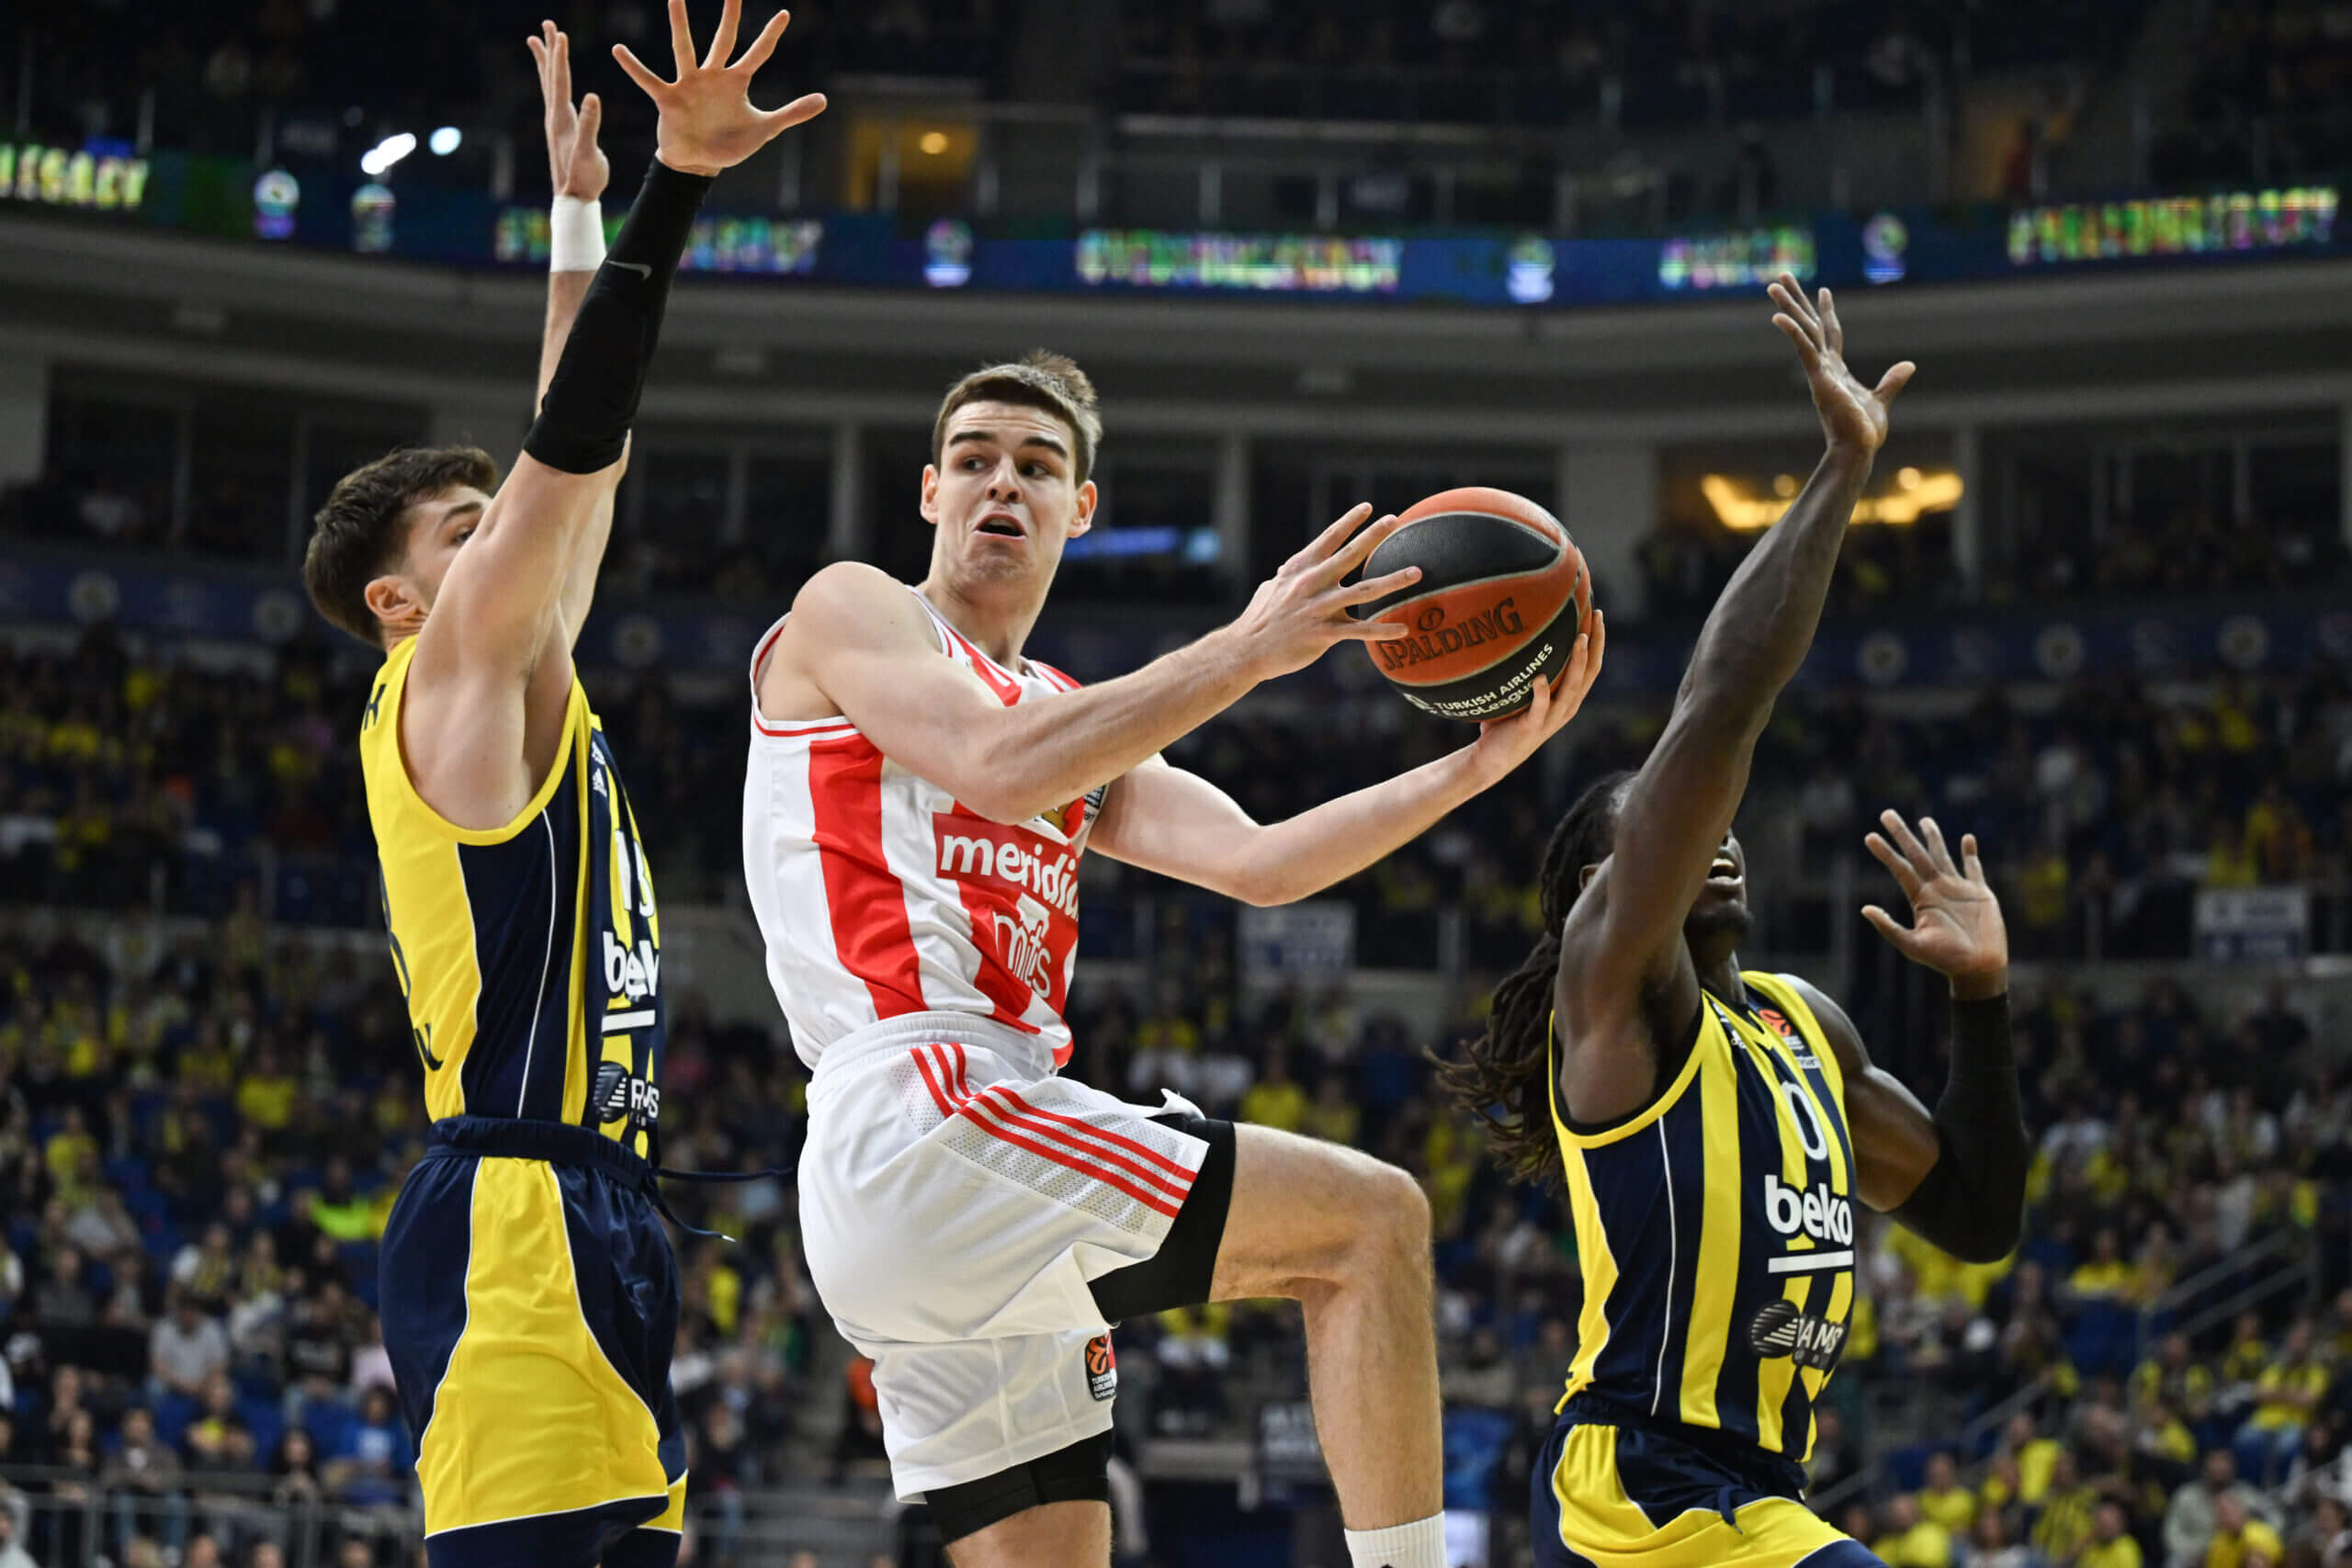 Projected top-10 NBA Draft pick Topić partially tears ACL